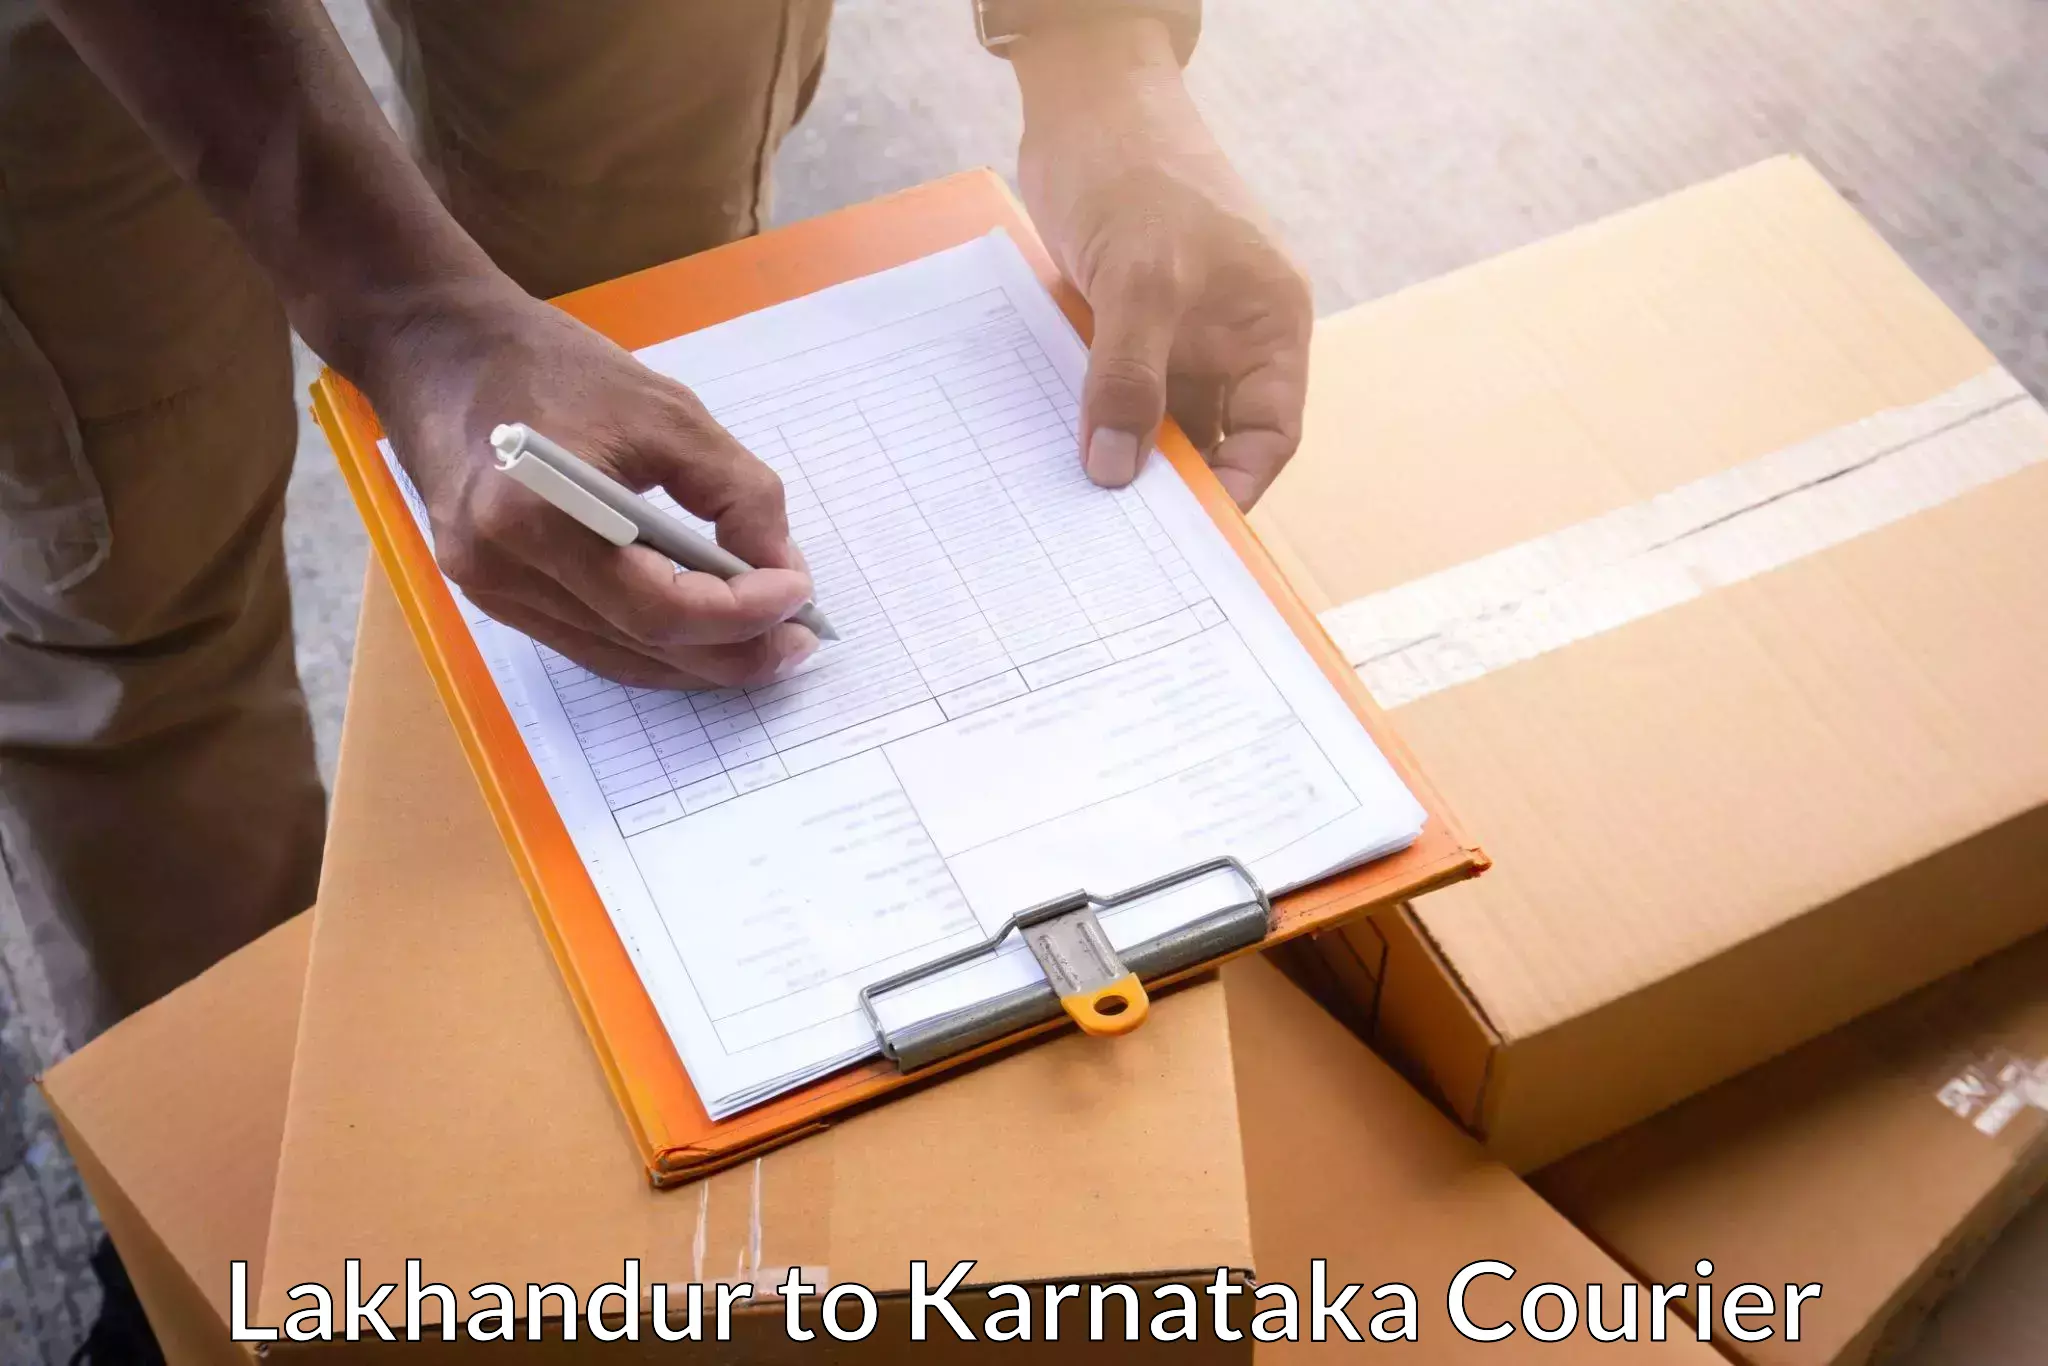 State-of-the-art courier technology Lakhandur to Yellare